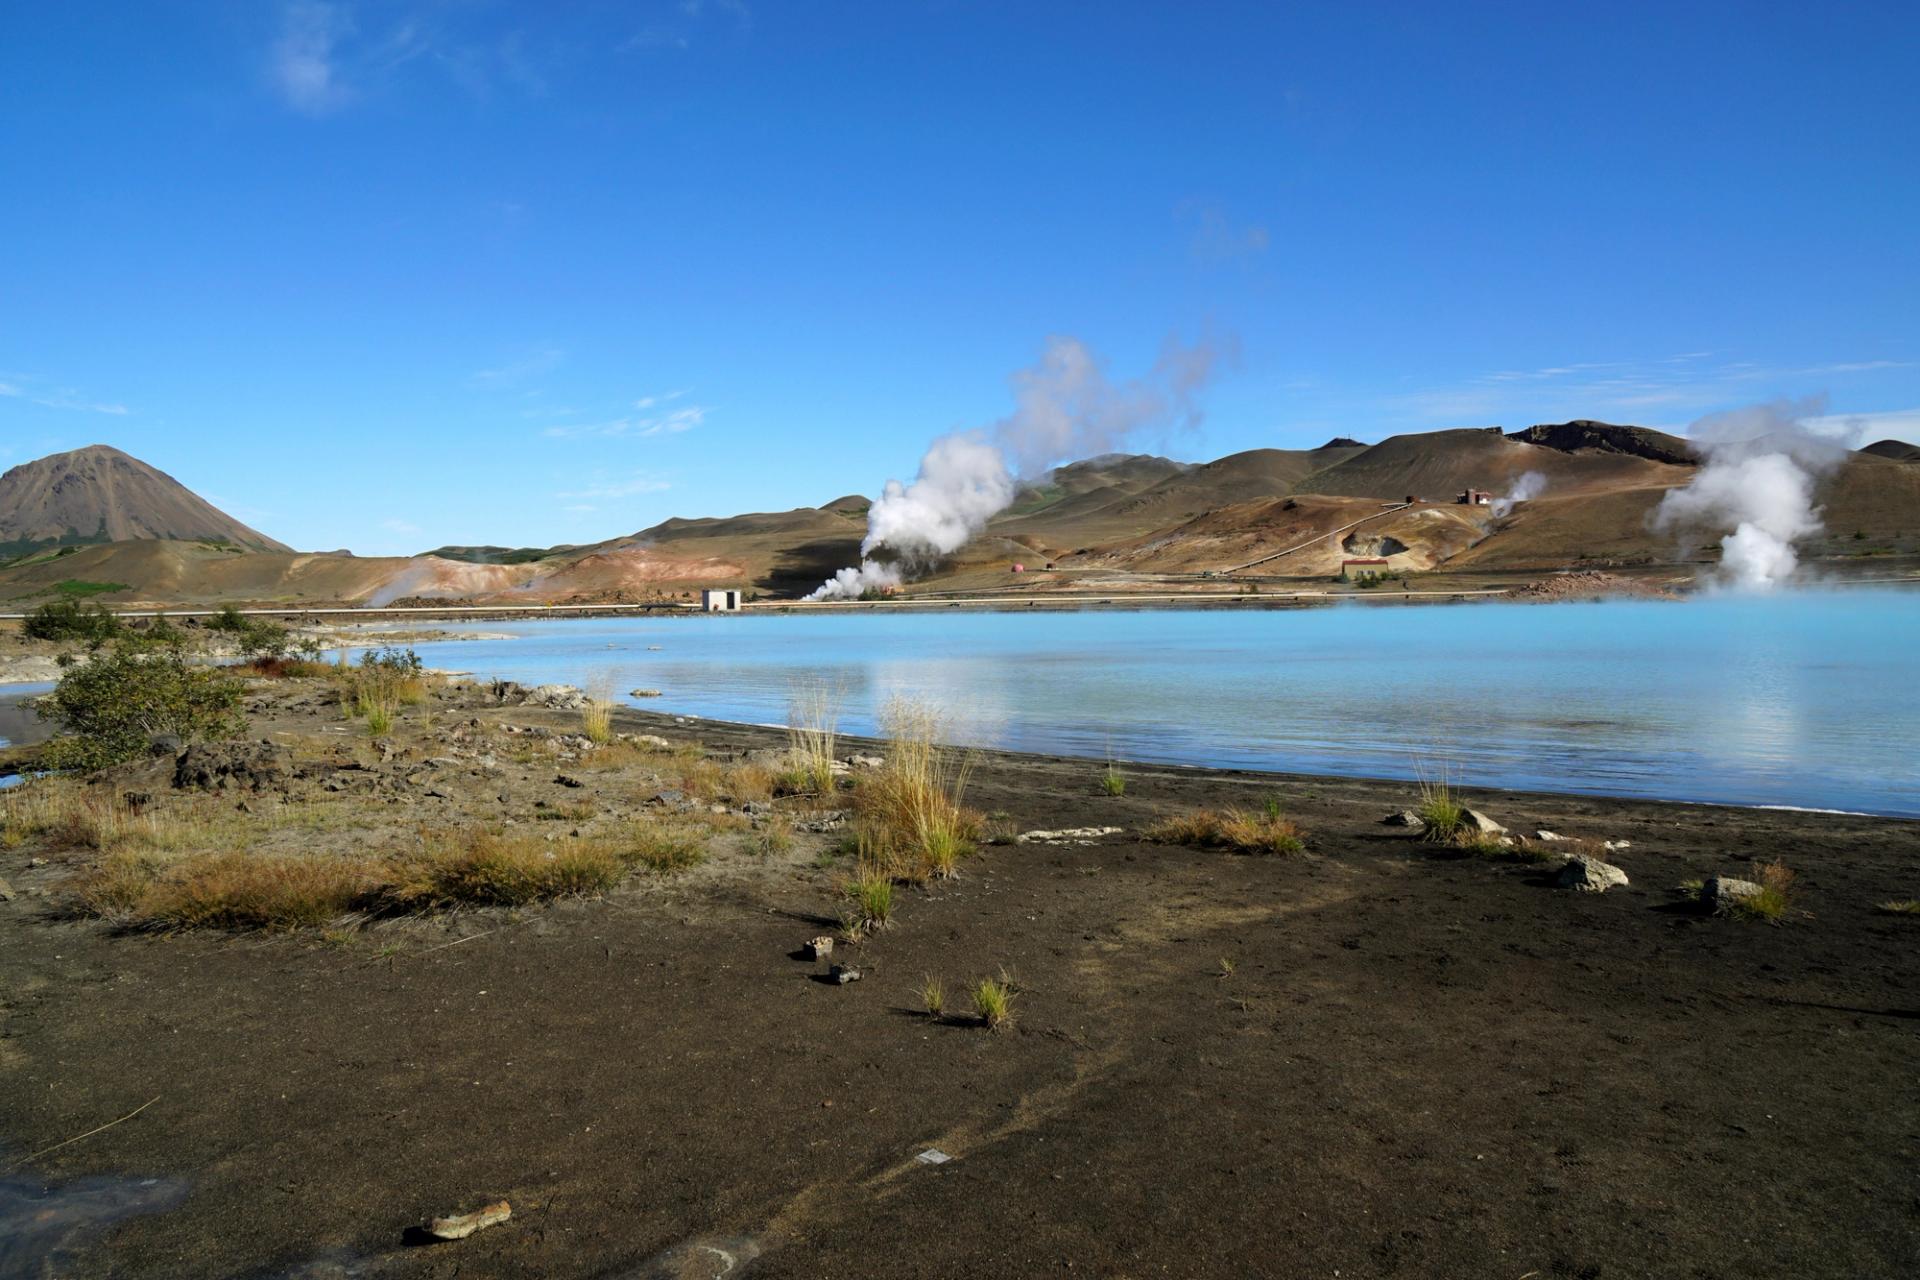 Visiting Lake Myvatn in iceland with volcanic activity in the background